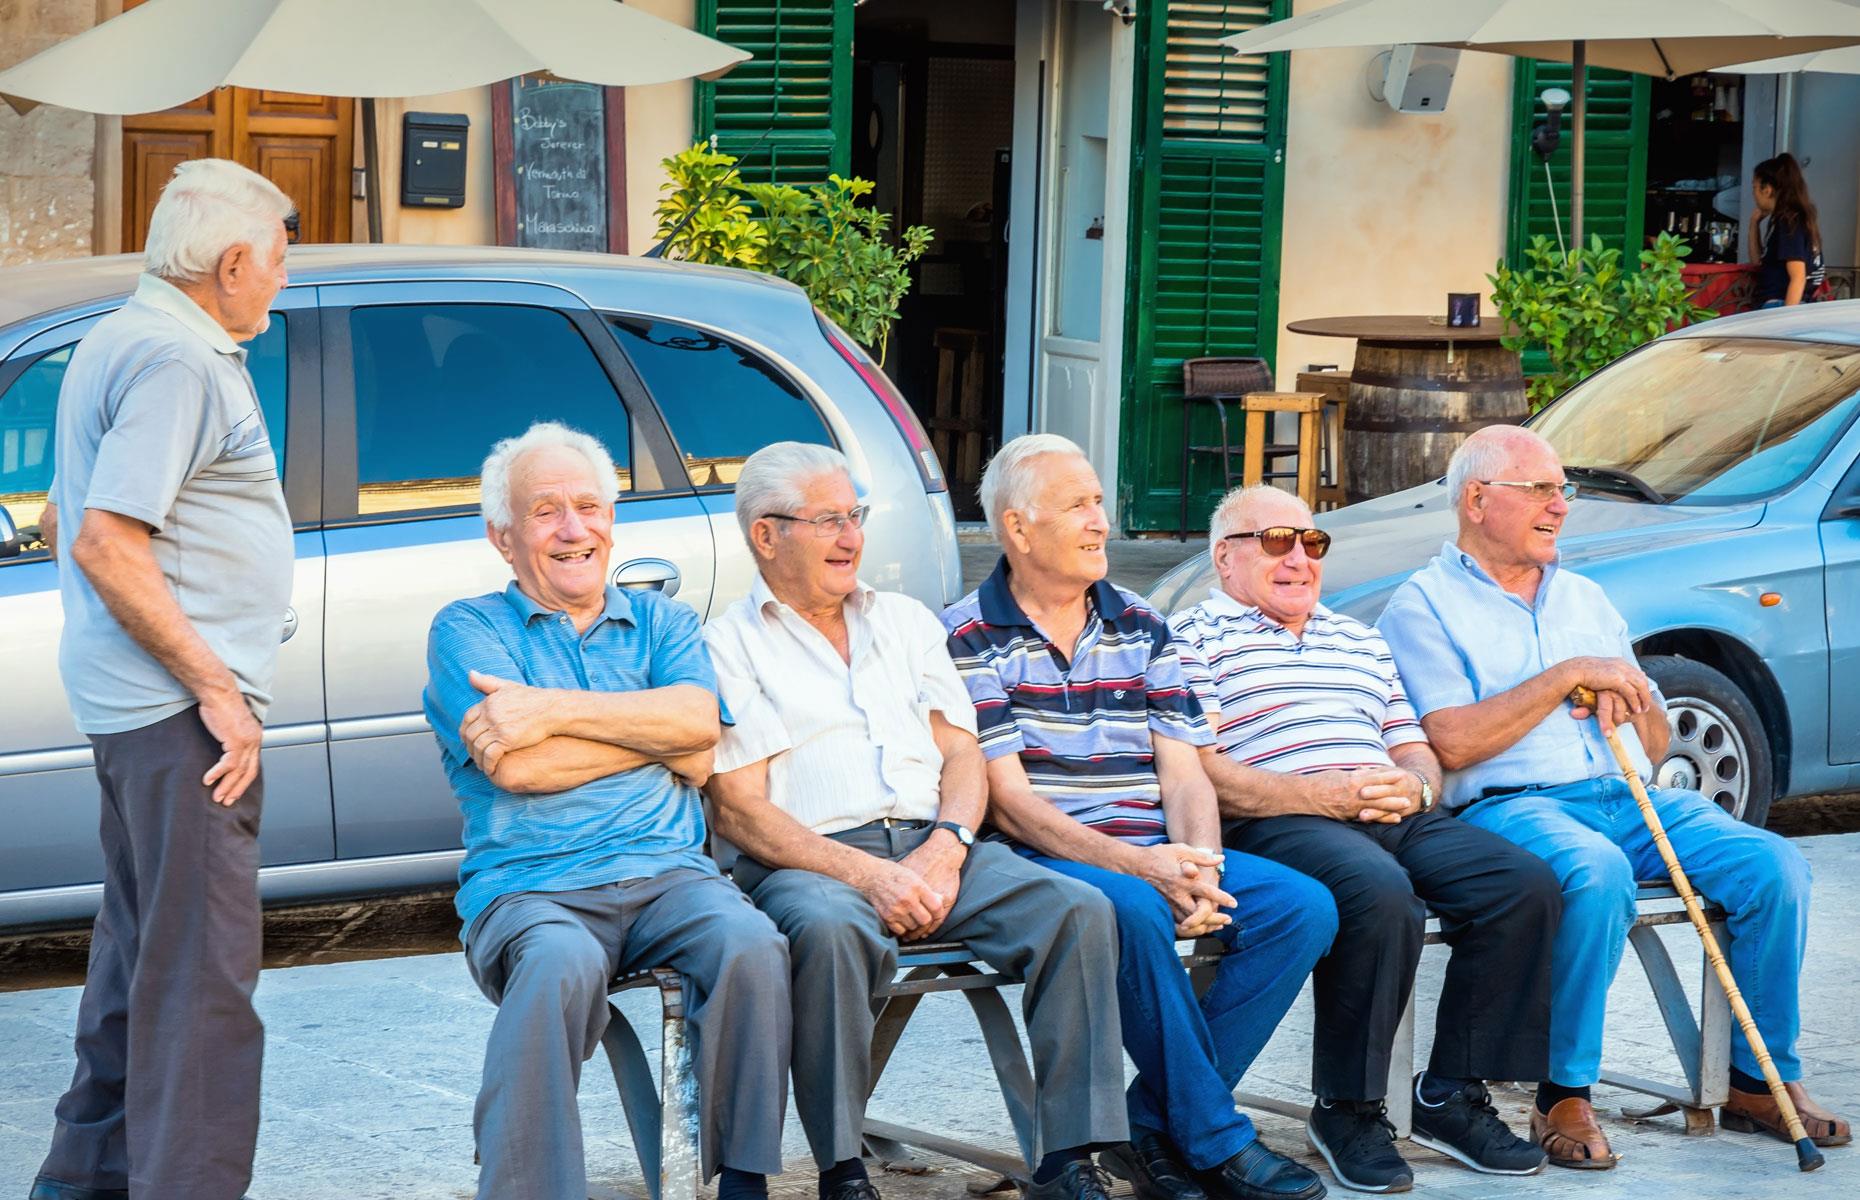 <p>Life expectancy in Italy has soared from 65.7 years in 1950 to 84.2 this year. But since 2010 the rate of increase has slowed, with factors such as rising poverty, less healthy lifestyle choices among the population, a lack of screening for preventable diseases, and poorer healthcare all suggested as possible drivers.</p>  <p>Italy still ranks among the world's longest-living countries, and life expectancy is forecast to hit 87.7 by 2050. Italy also boasts one of the world's original Blue Zones. The Ogliastra region of Sardinia has the highest number of centenarian men in the world, with its low-protein, vegetable-rich diet identified as the key secret to its inhabitants' longevity.</p>